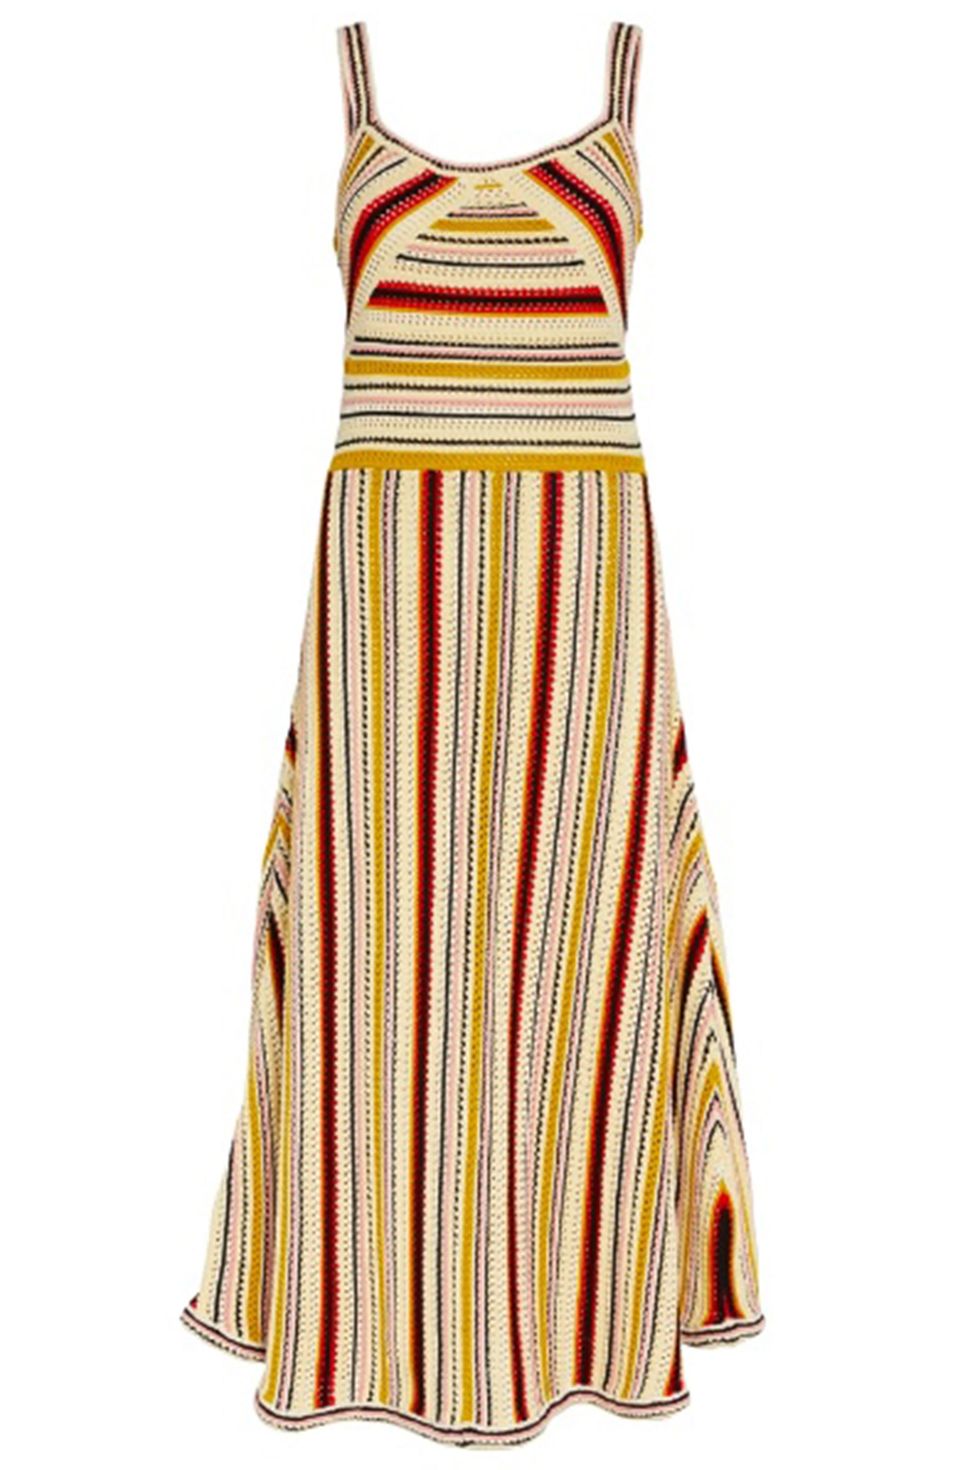 15 best summer dresses of 2023 - Stylish dresses for hot weather